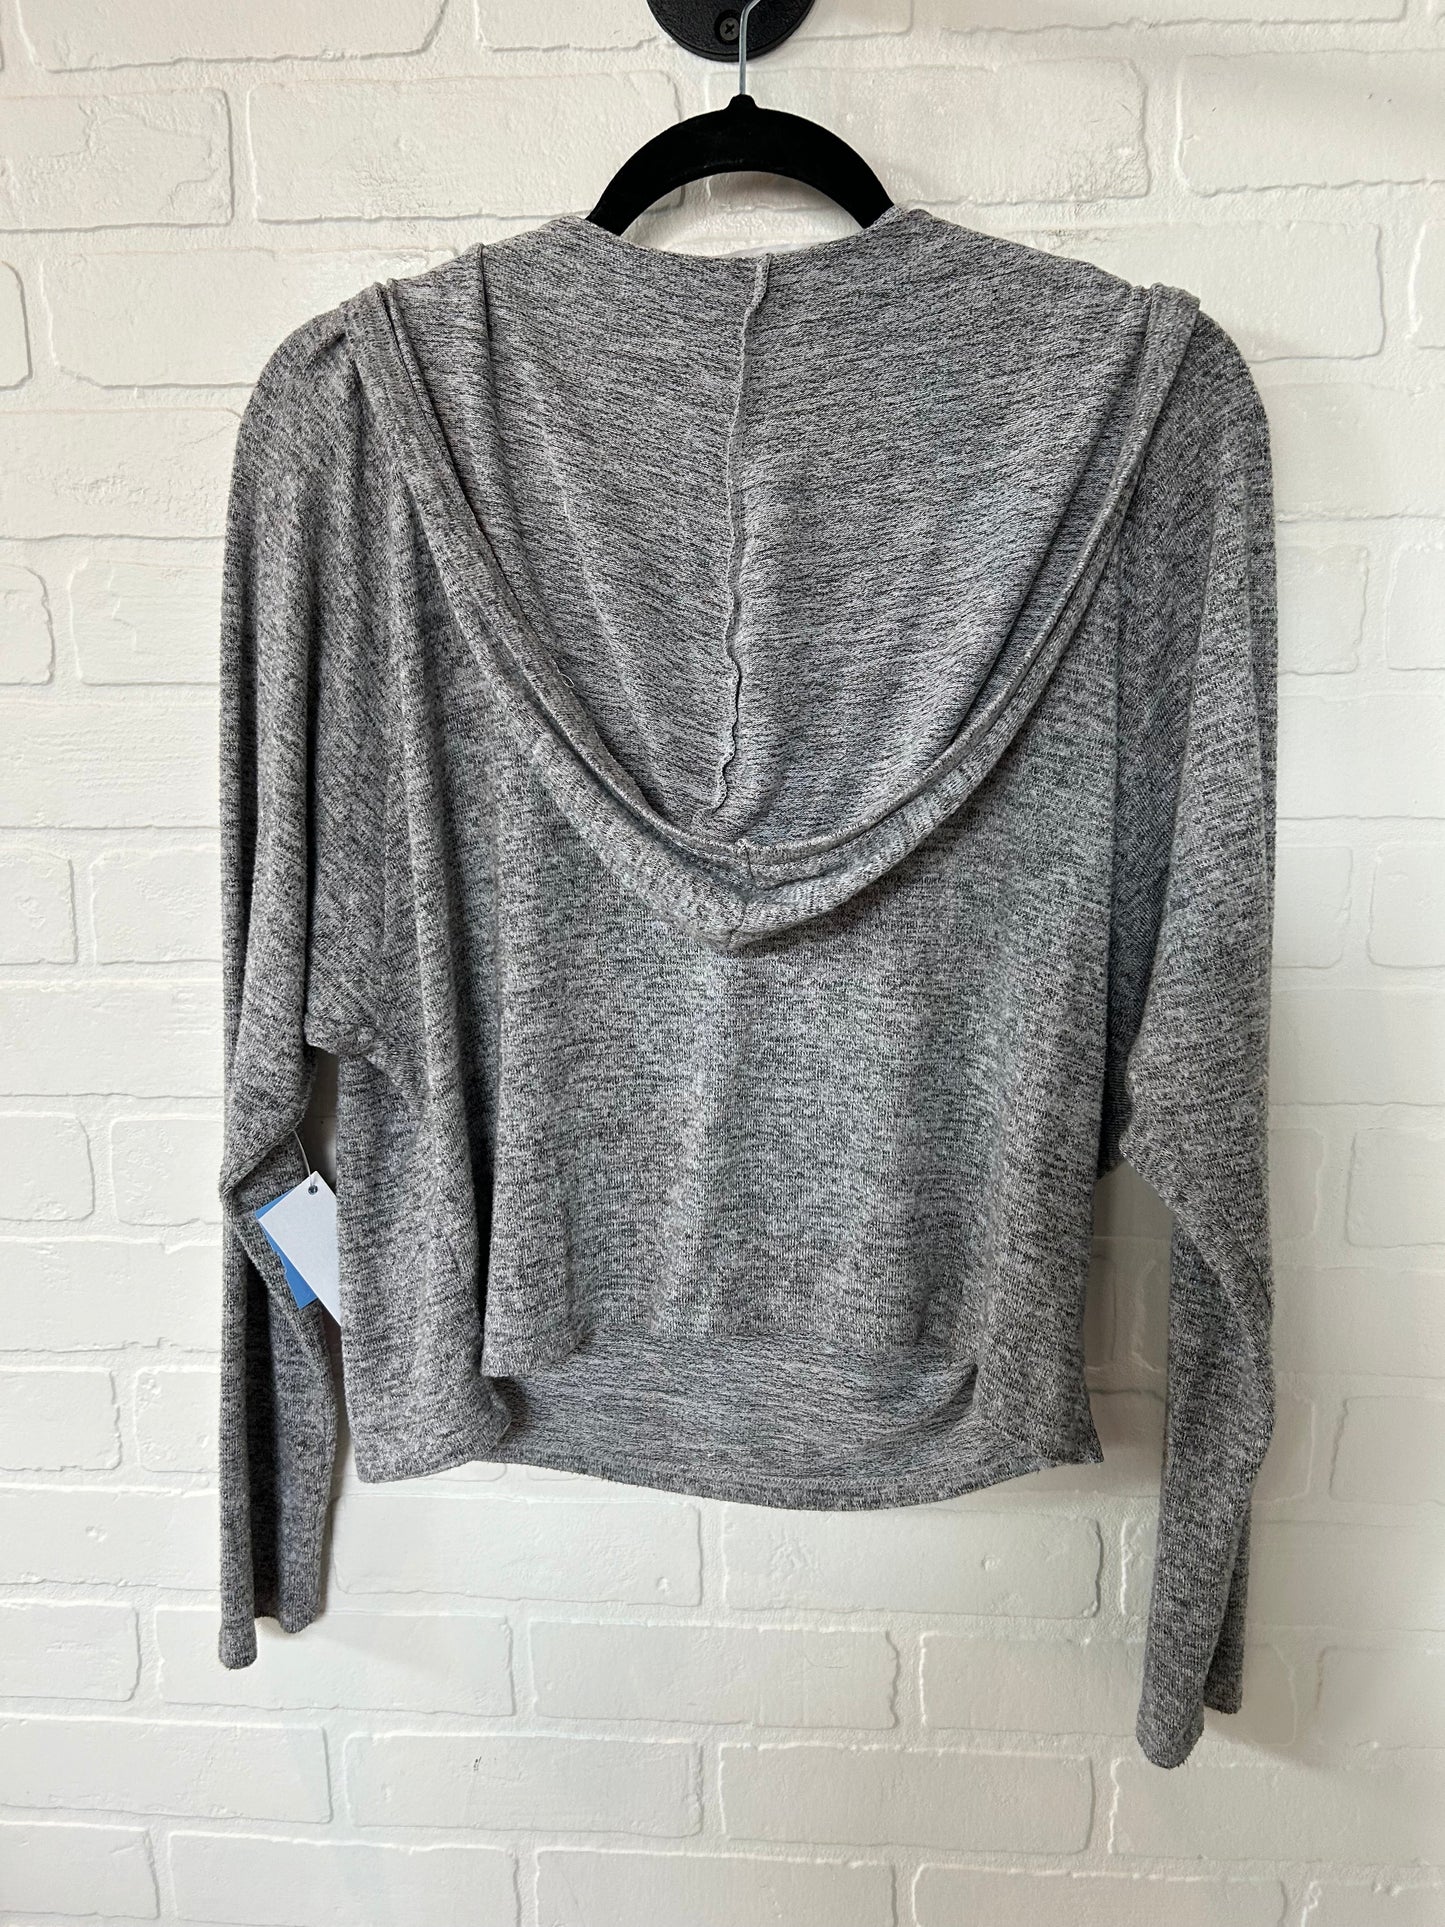 Grey Top Long Sleeve Basic Clothes Mentor, Size Xs